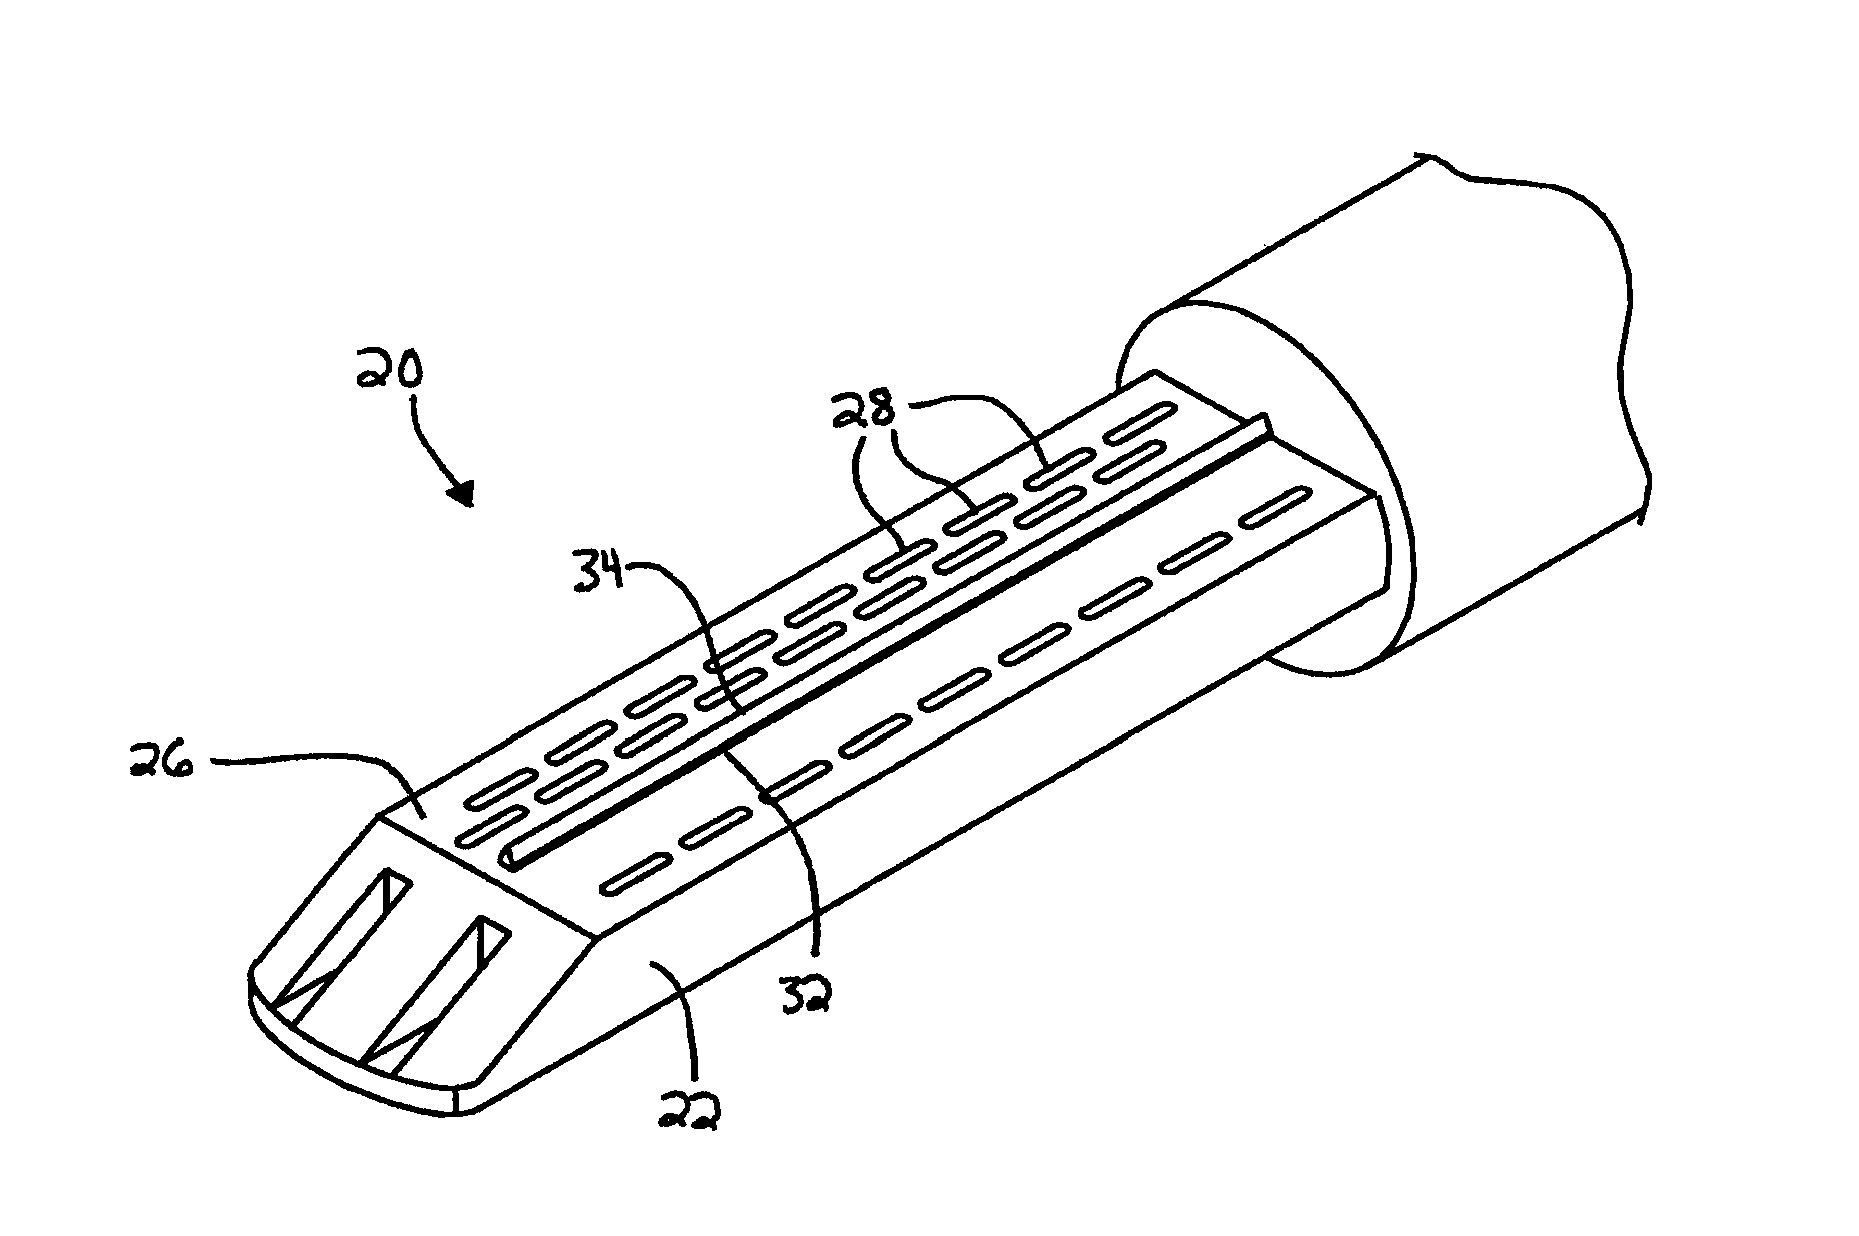 Apparatus and method for preserving a tissue margin